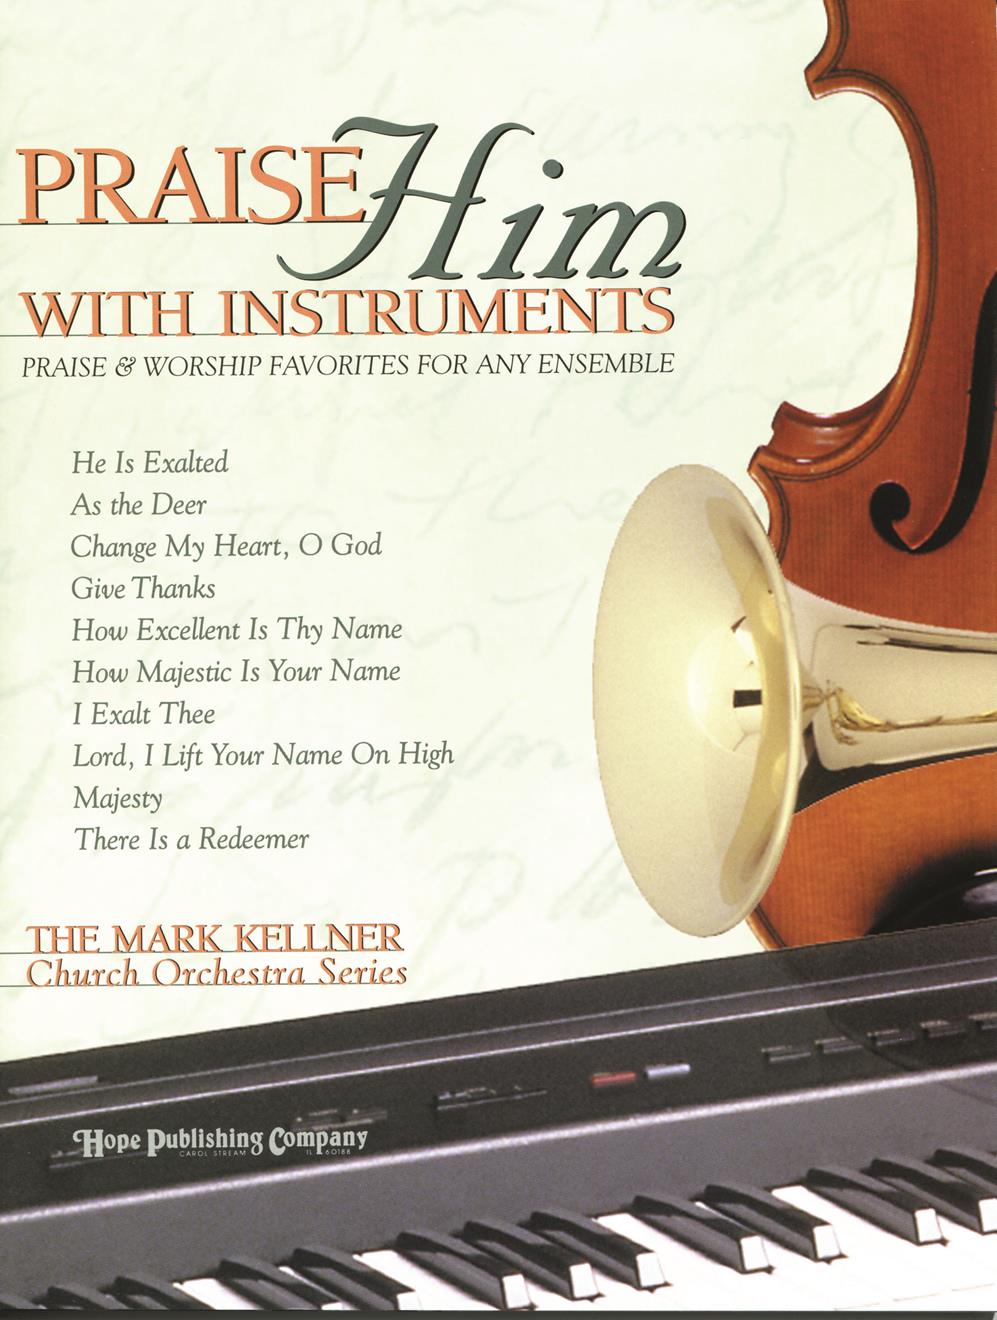 Praise Him with Instruments - Full Set Cover Image